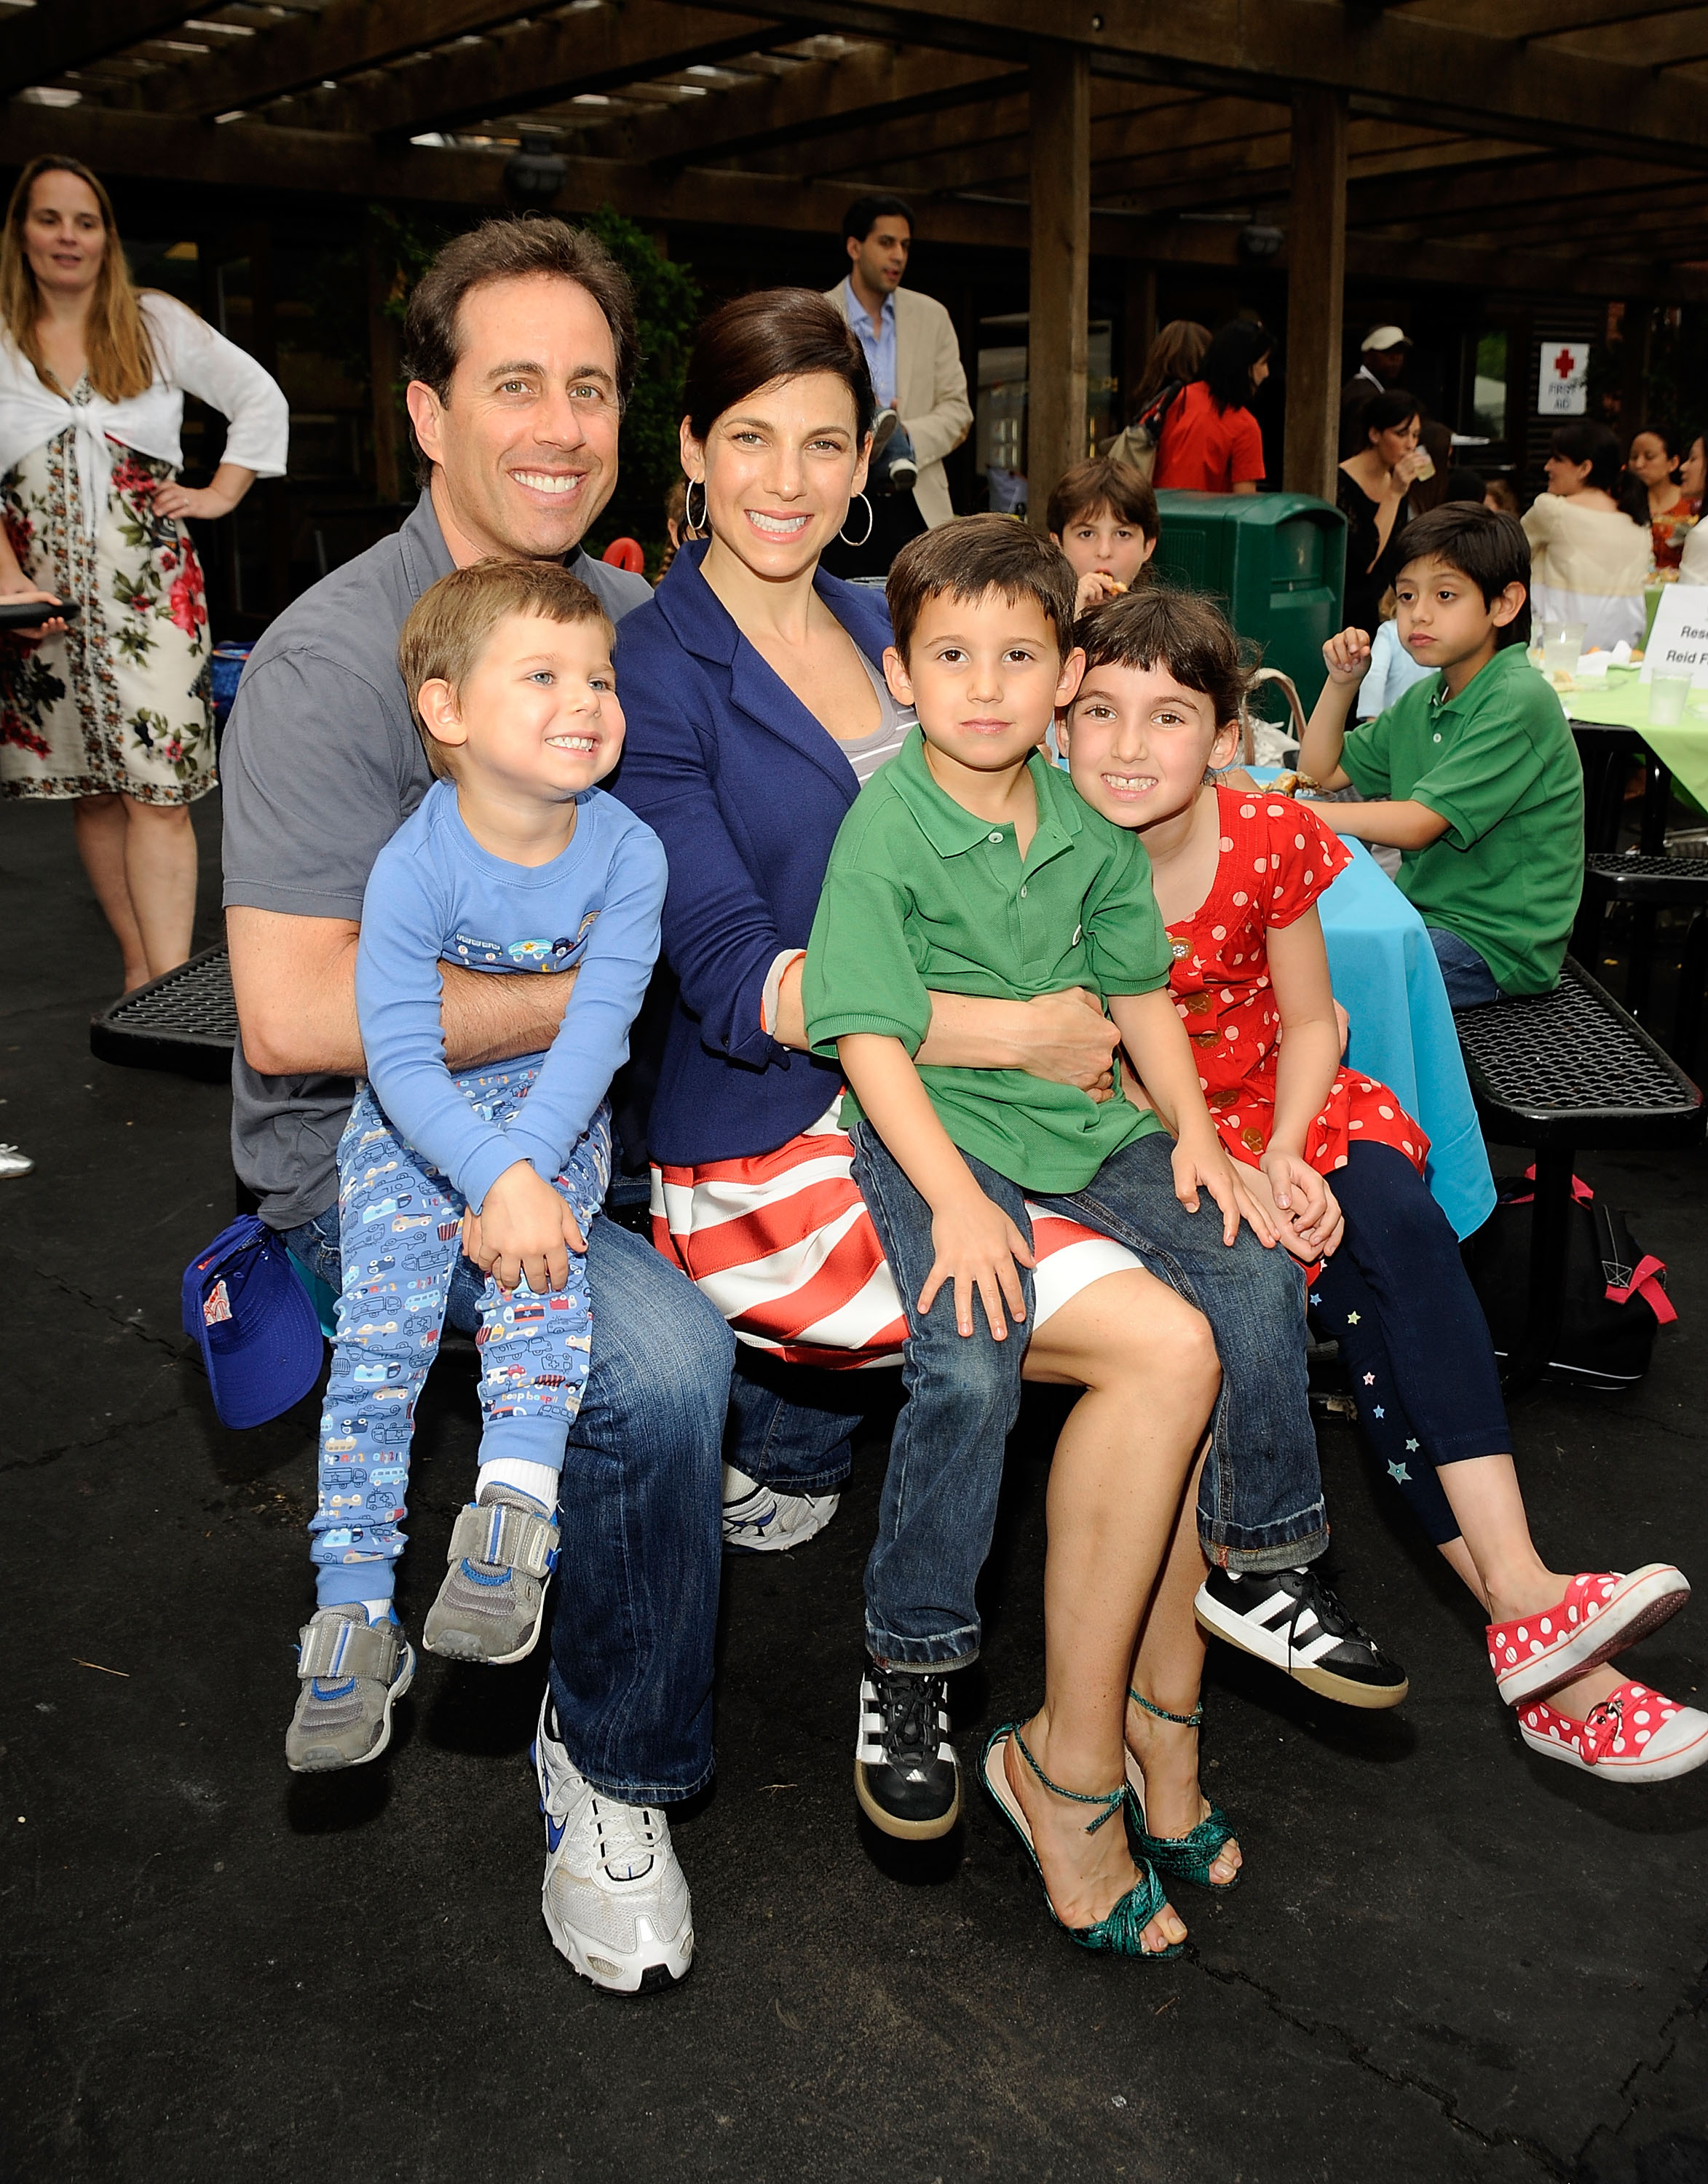 <p>Take a look back at how celebrities' kids have grown into teens and adults over the years… </p><p>Comedian Jerry Seinfeld and wife Jessica Seinfeld, a bestselling cookbook author and philanthropist, took their three kids -- sons Shepherd, then 3, and Julian, then 6; and daughter Sascha, then 8 -- to the Third Annual Baby Buggy Bedtime Bash benefit at Victorian Gardens at Wollman Rink Central Park in New York City in June 2009.</p><p>Keep reading to see Julian on his 20th birthday...</p><p><em>Then keep reading to see dozens more celebrity children then and now…</em></p><p>MORE: <a href="https://www.wonderwall.com/celebrity/stars-who-had-babies-in-2023-celebrities-gave-birth-adopted-this-year-694508.gallery">Stars who had babies in 2023 </a></p>